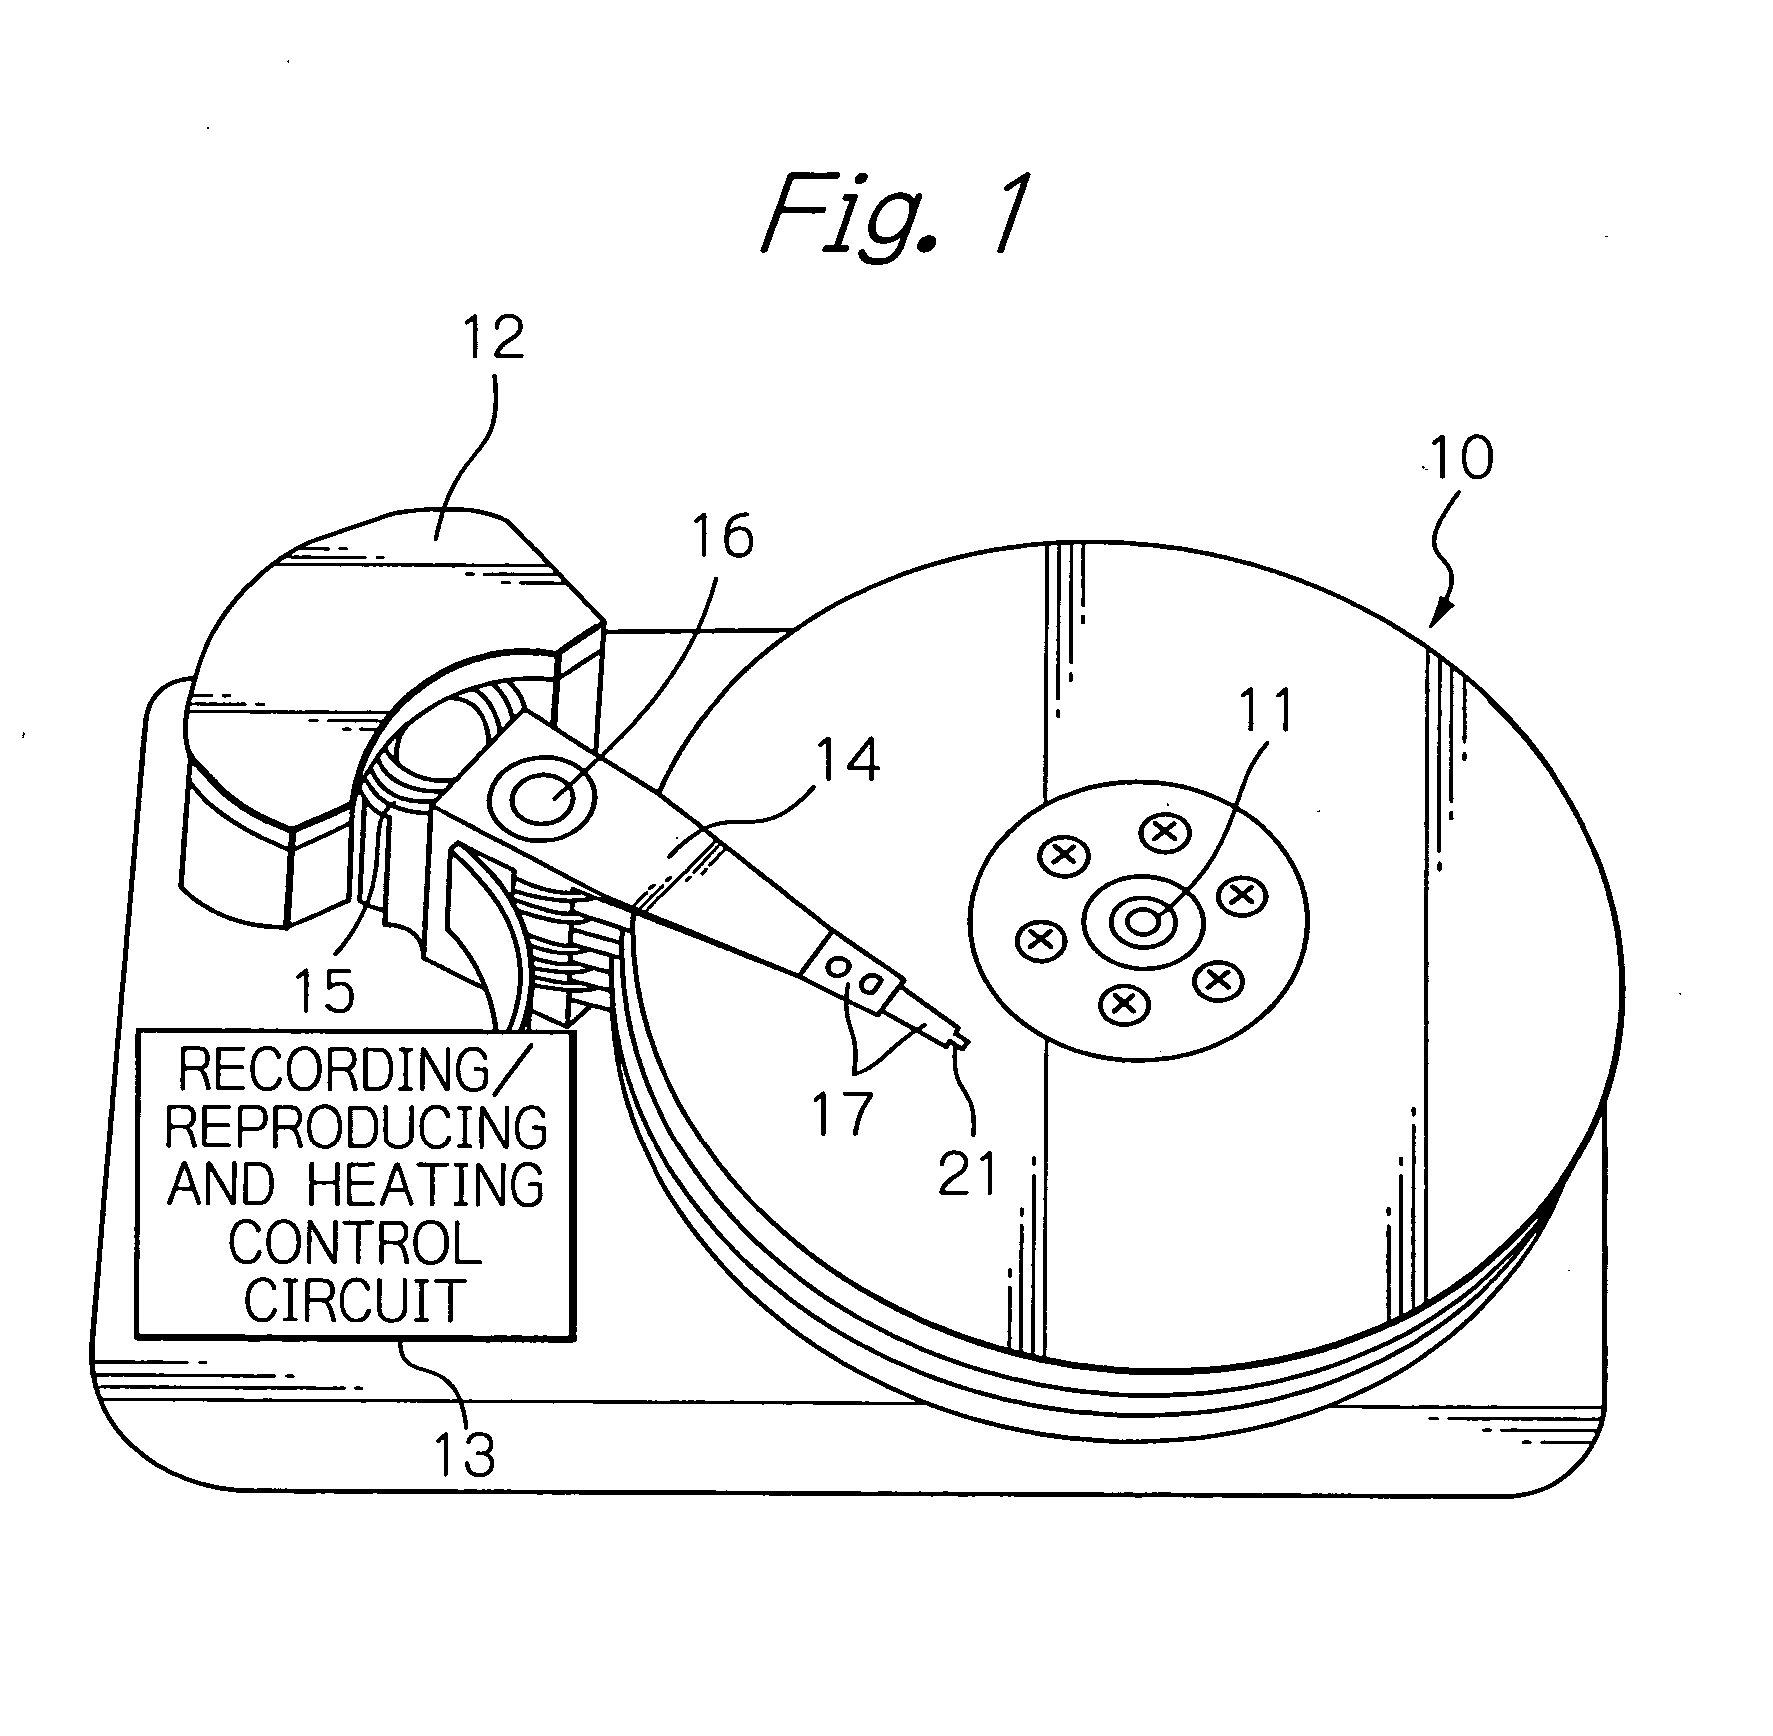 Thin-film magnetic head with heating element and heatsink